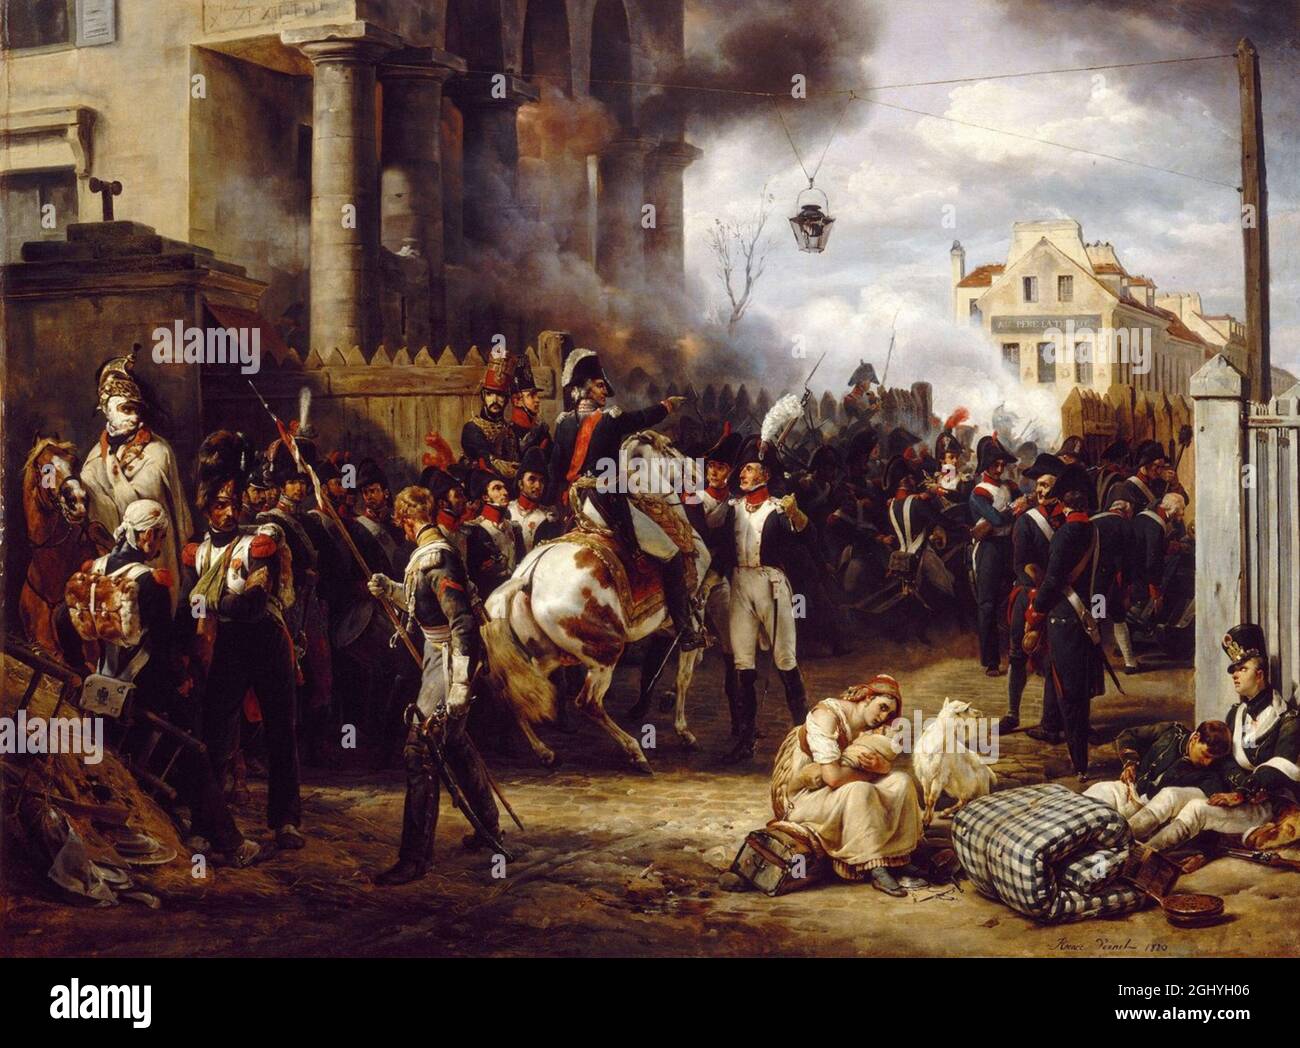 The defence of Paris during the fight against the Russian army in the capital in 1814. The painting depict fighting around a street barricade at Clichy., with Marshal Moncey giving orders. Painting by Horace Vernet. Stock Photo